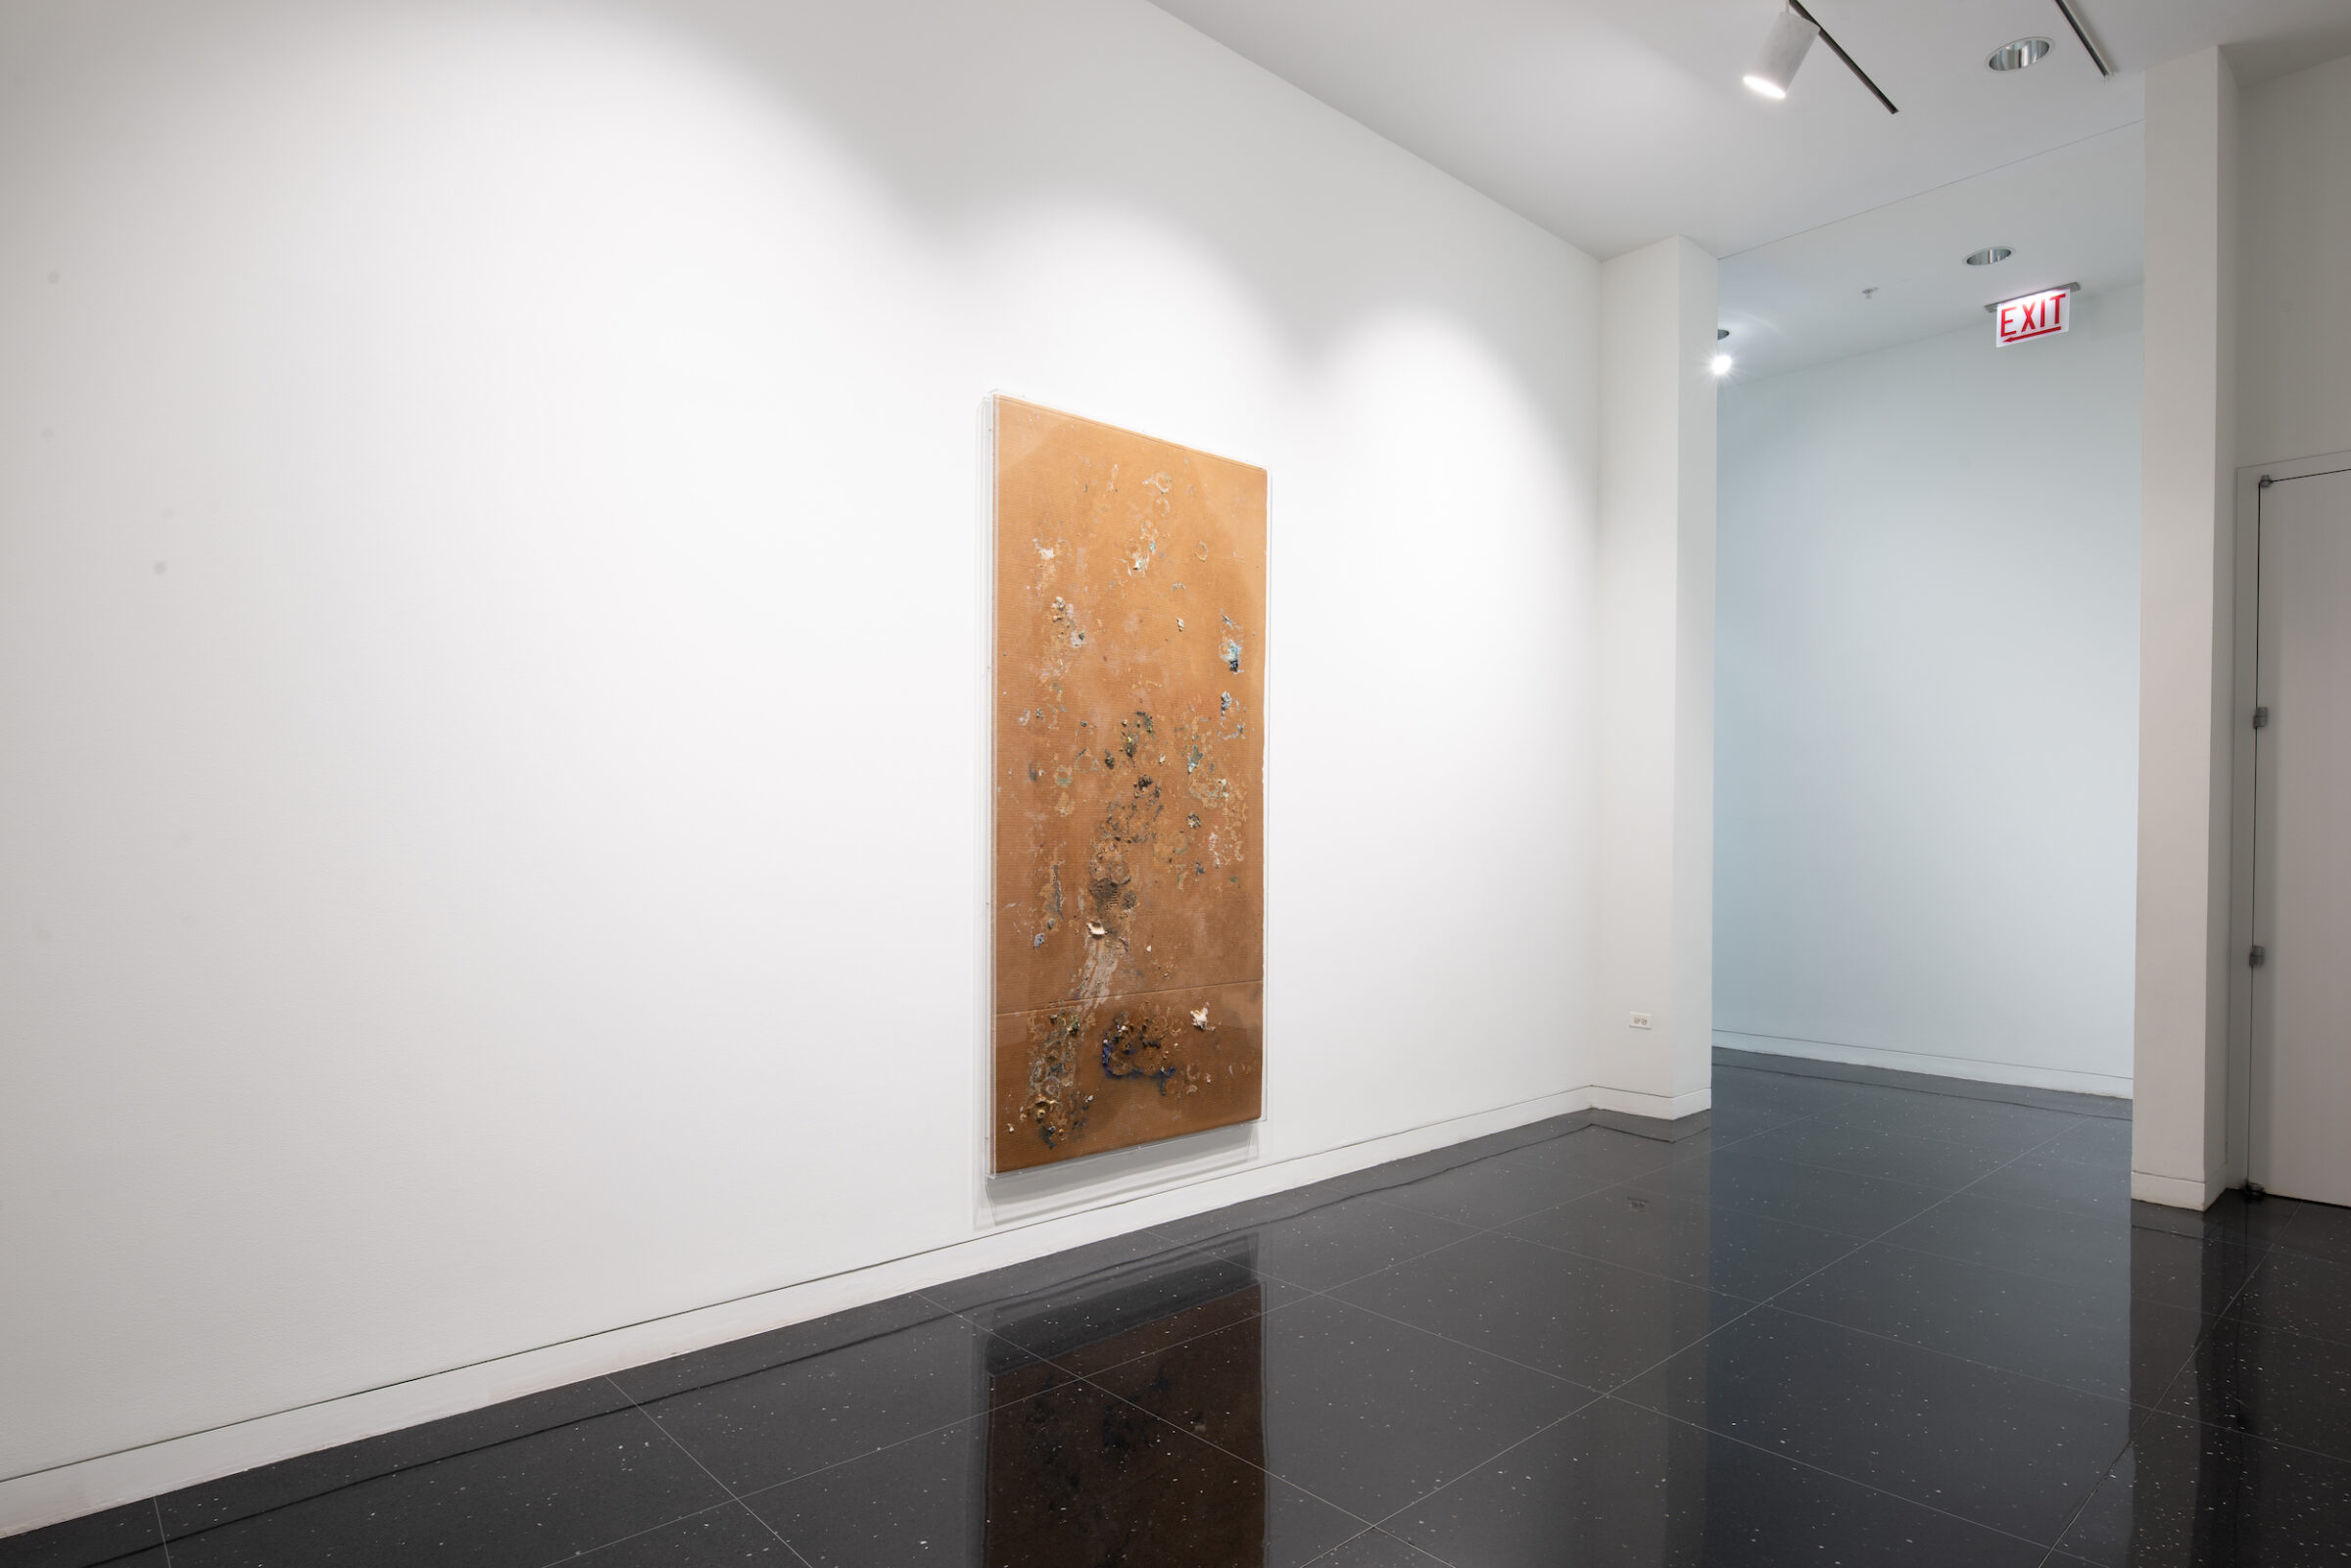 A large two dimensional wall piece hangs on a freestanding, white gallery wall. The wall piece is an orange-brown color and bears marks resembling corroded metal across its surface.